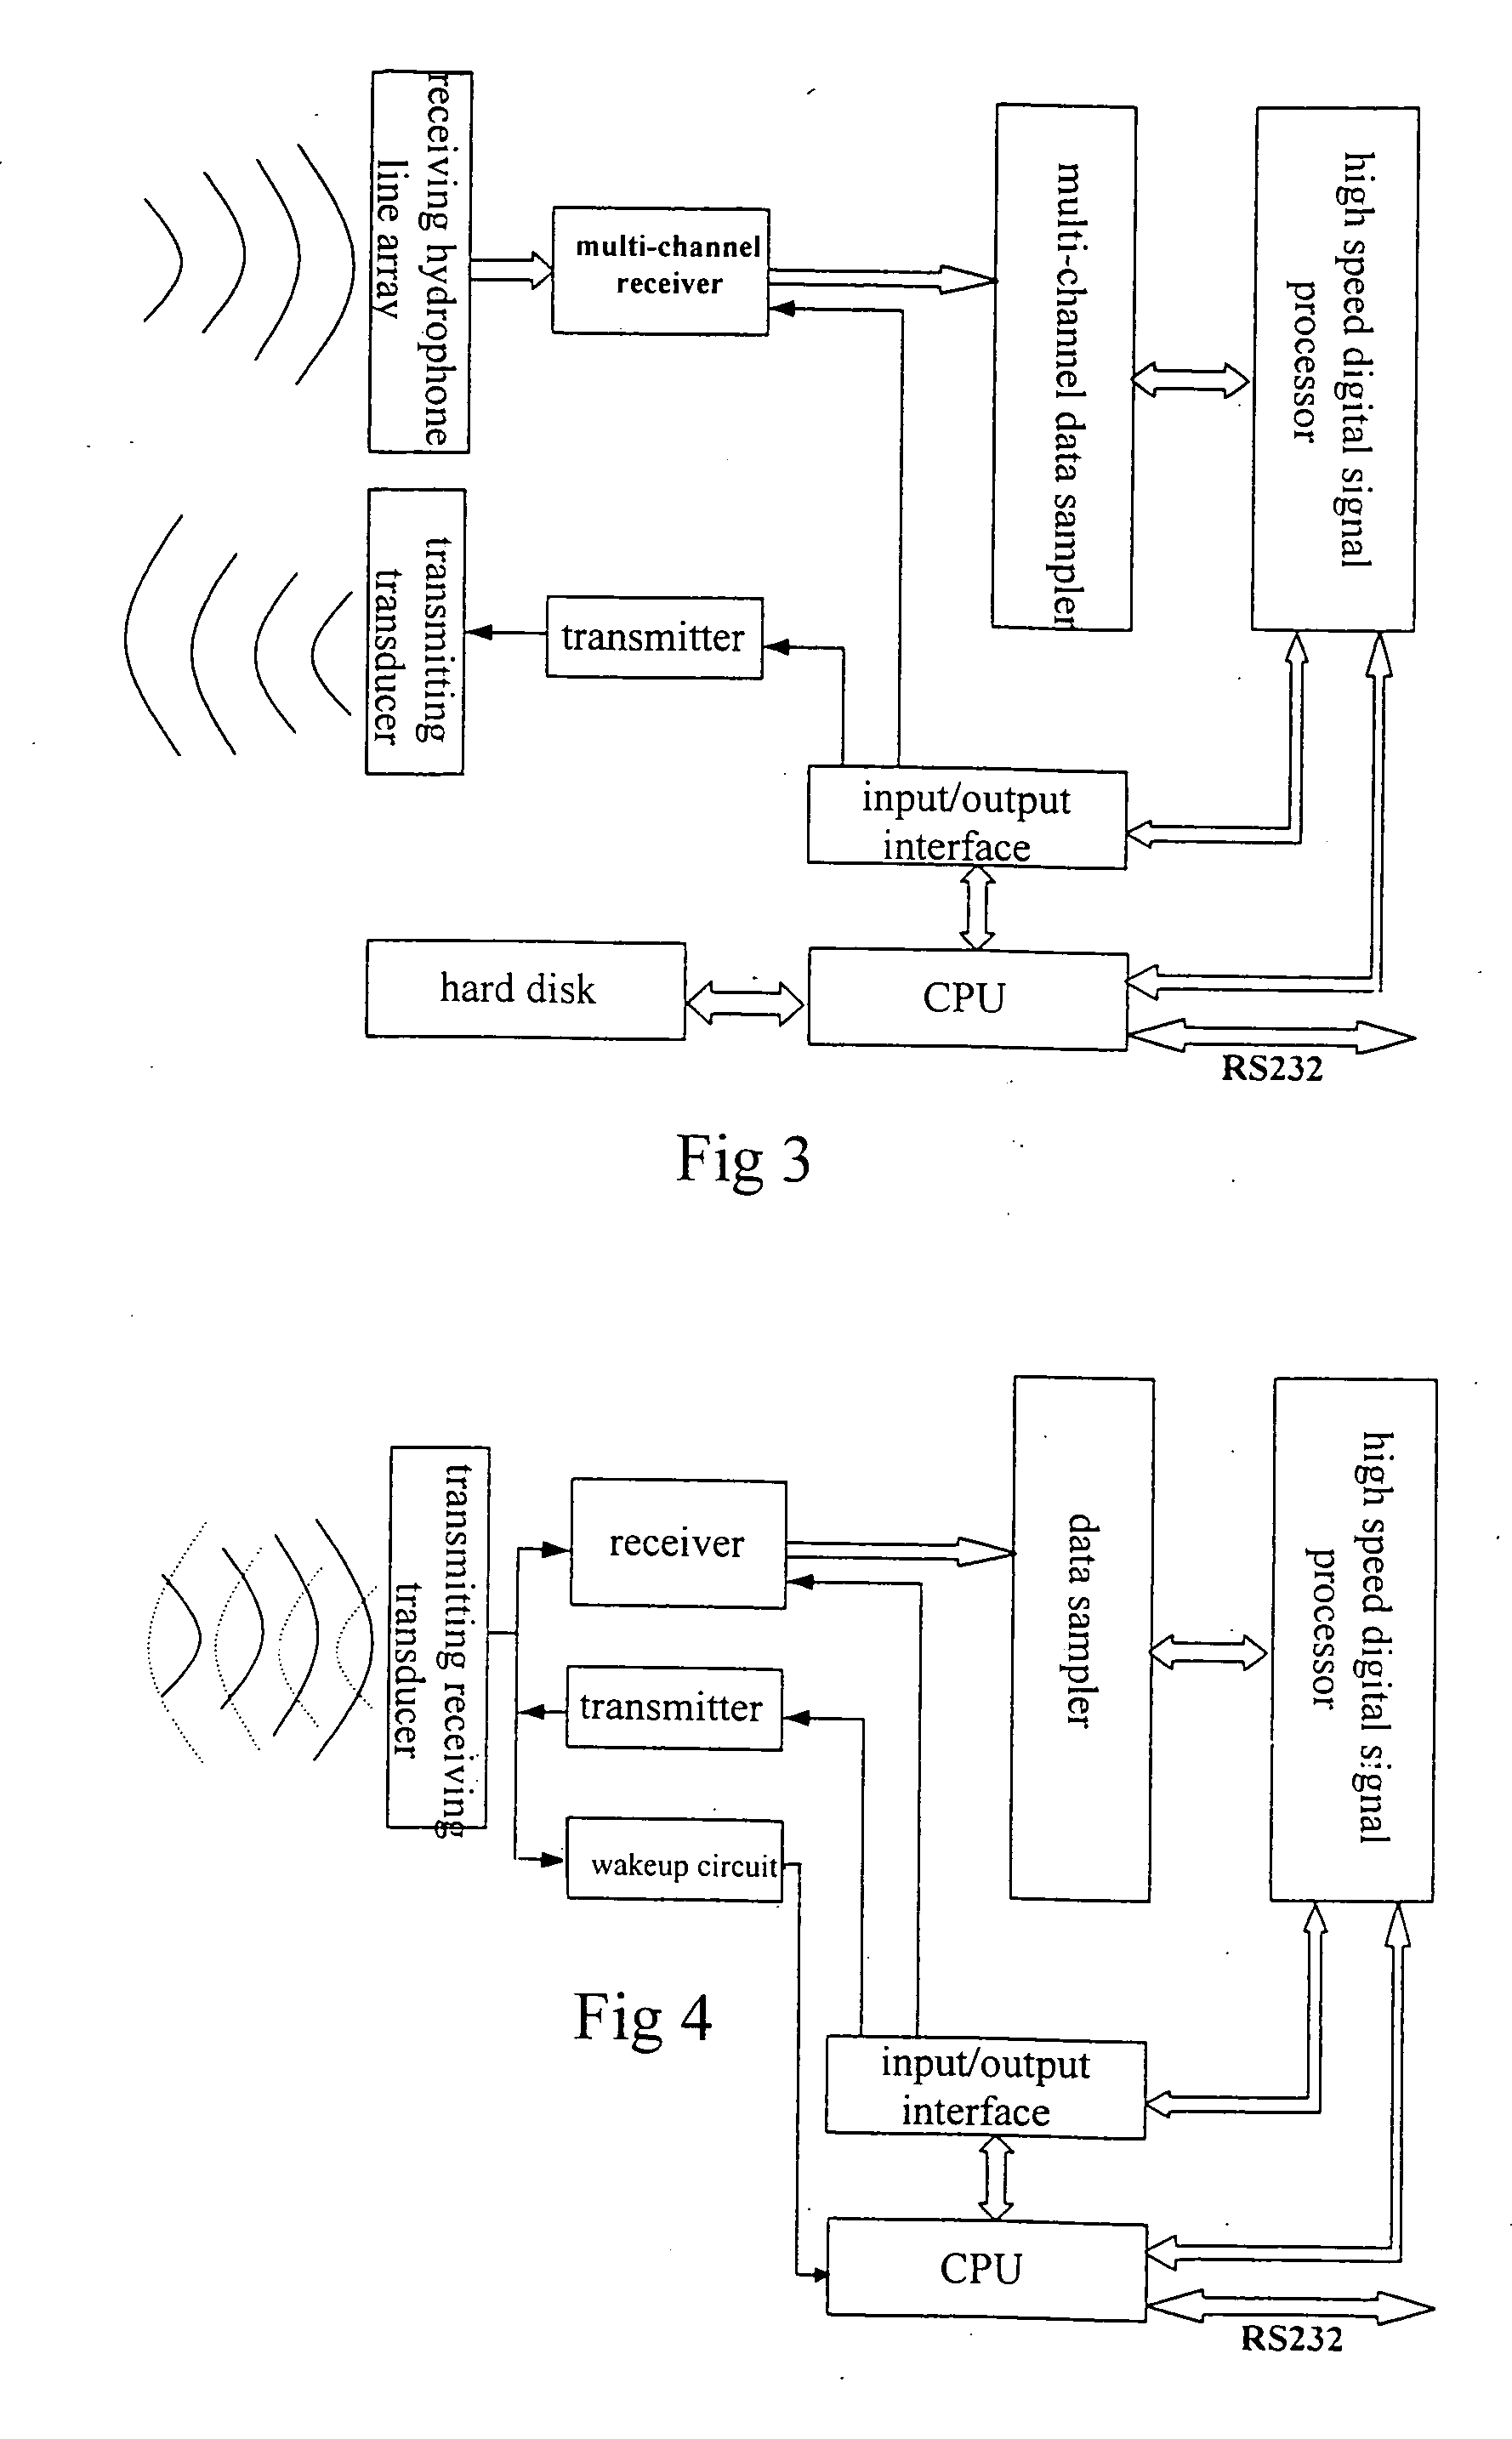 Water acoustic coherently communication system and signal processing method having high code rate, low probability of error